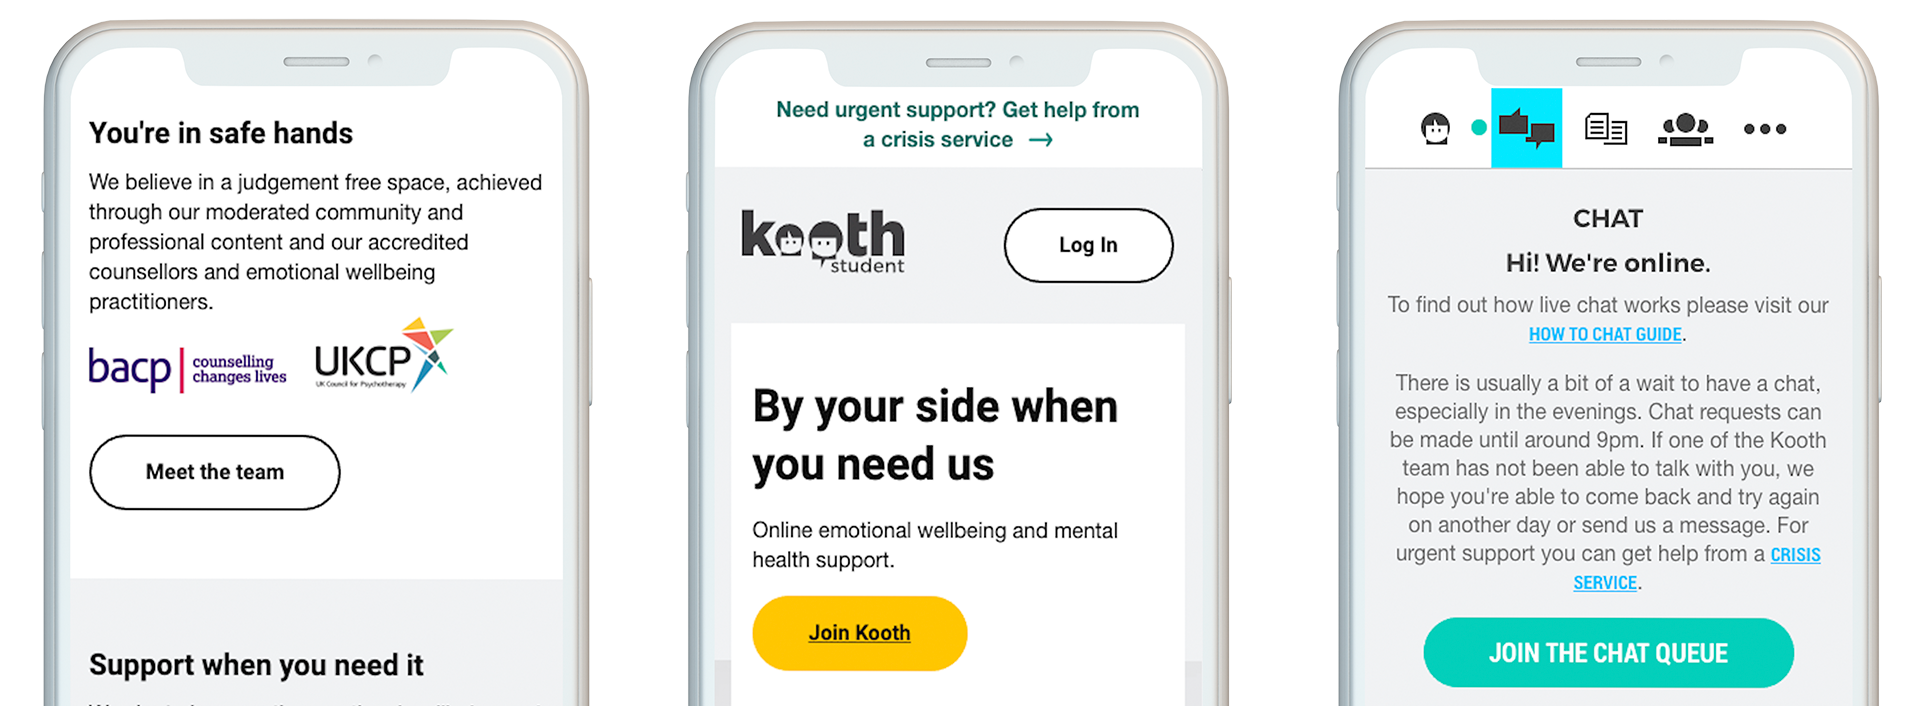 A few features you'll find on Kooth Student include mini-activities, access to discussions, as well as articles written by students and the Kooth team.